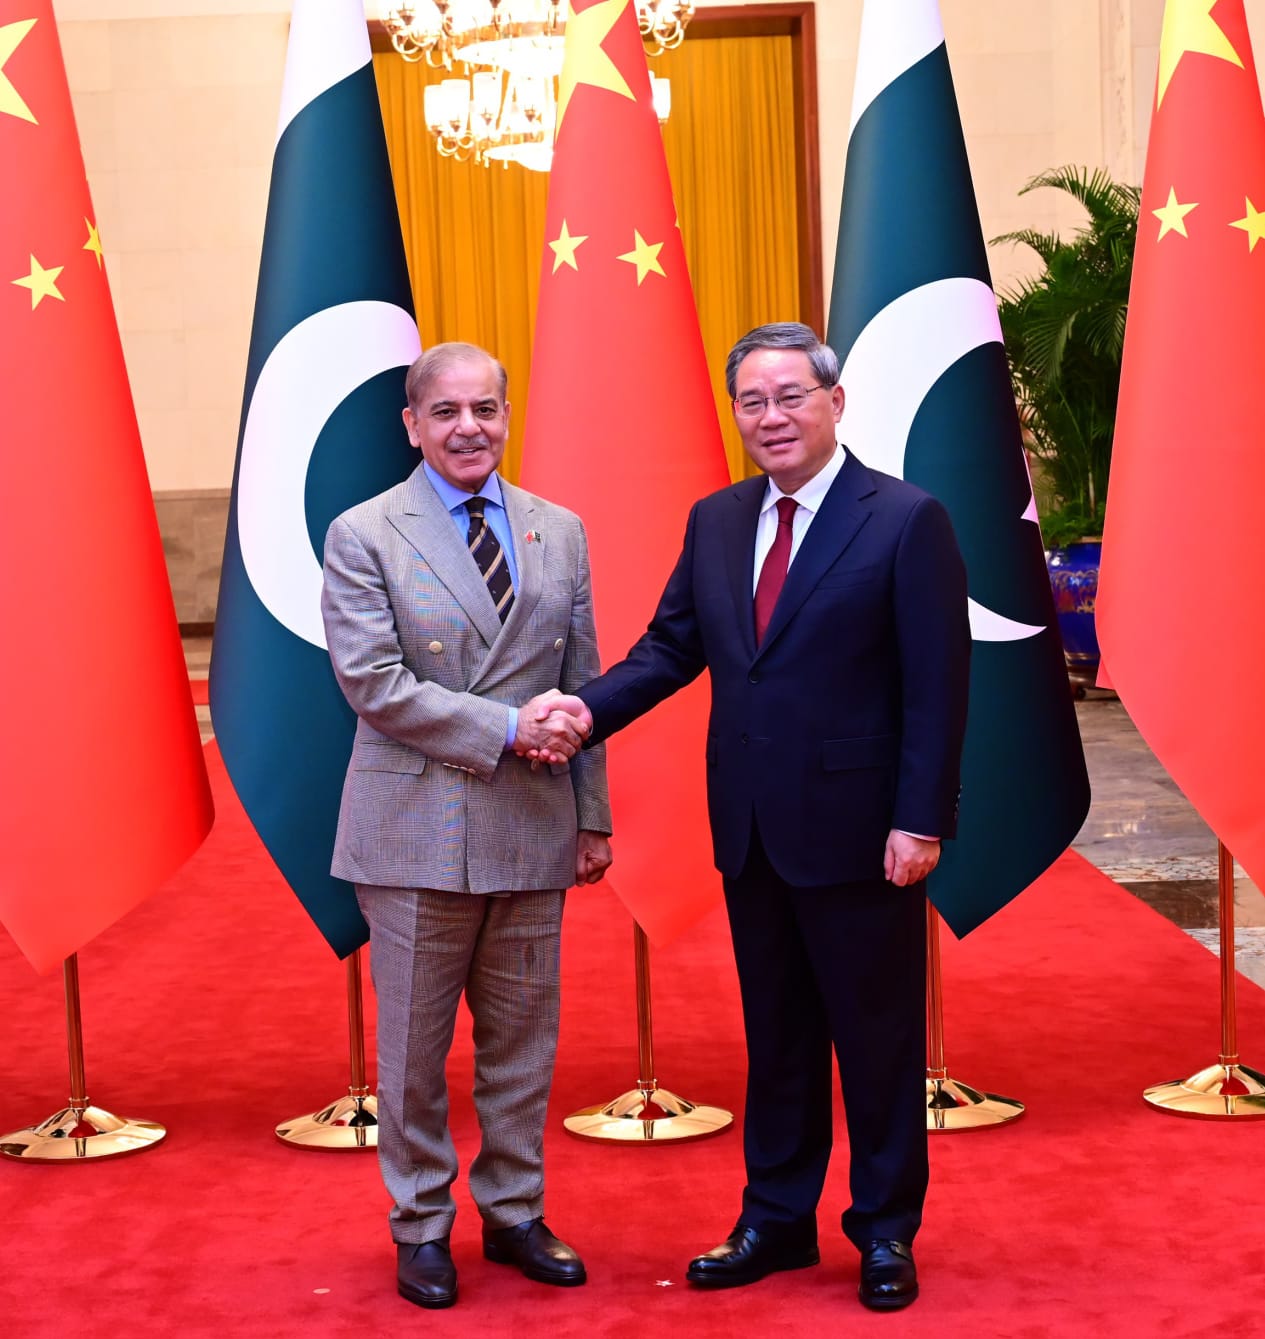 Prime Minister meeting with his Chinese countertop H.E. Li Qiqan at Great Hall of the People.